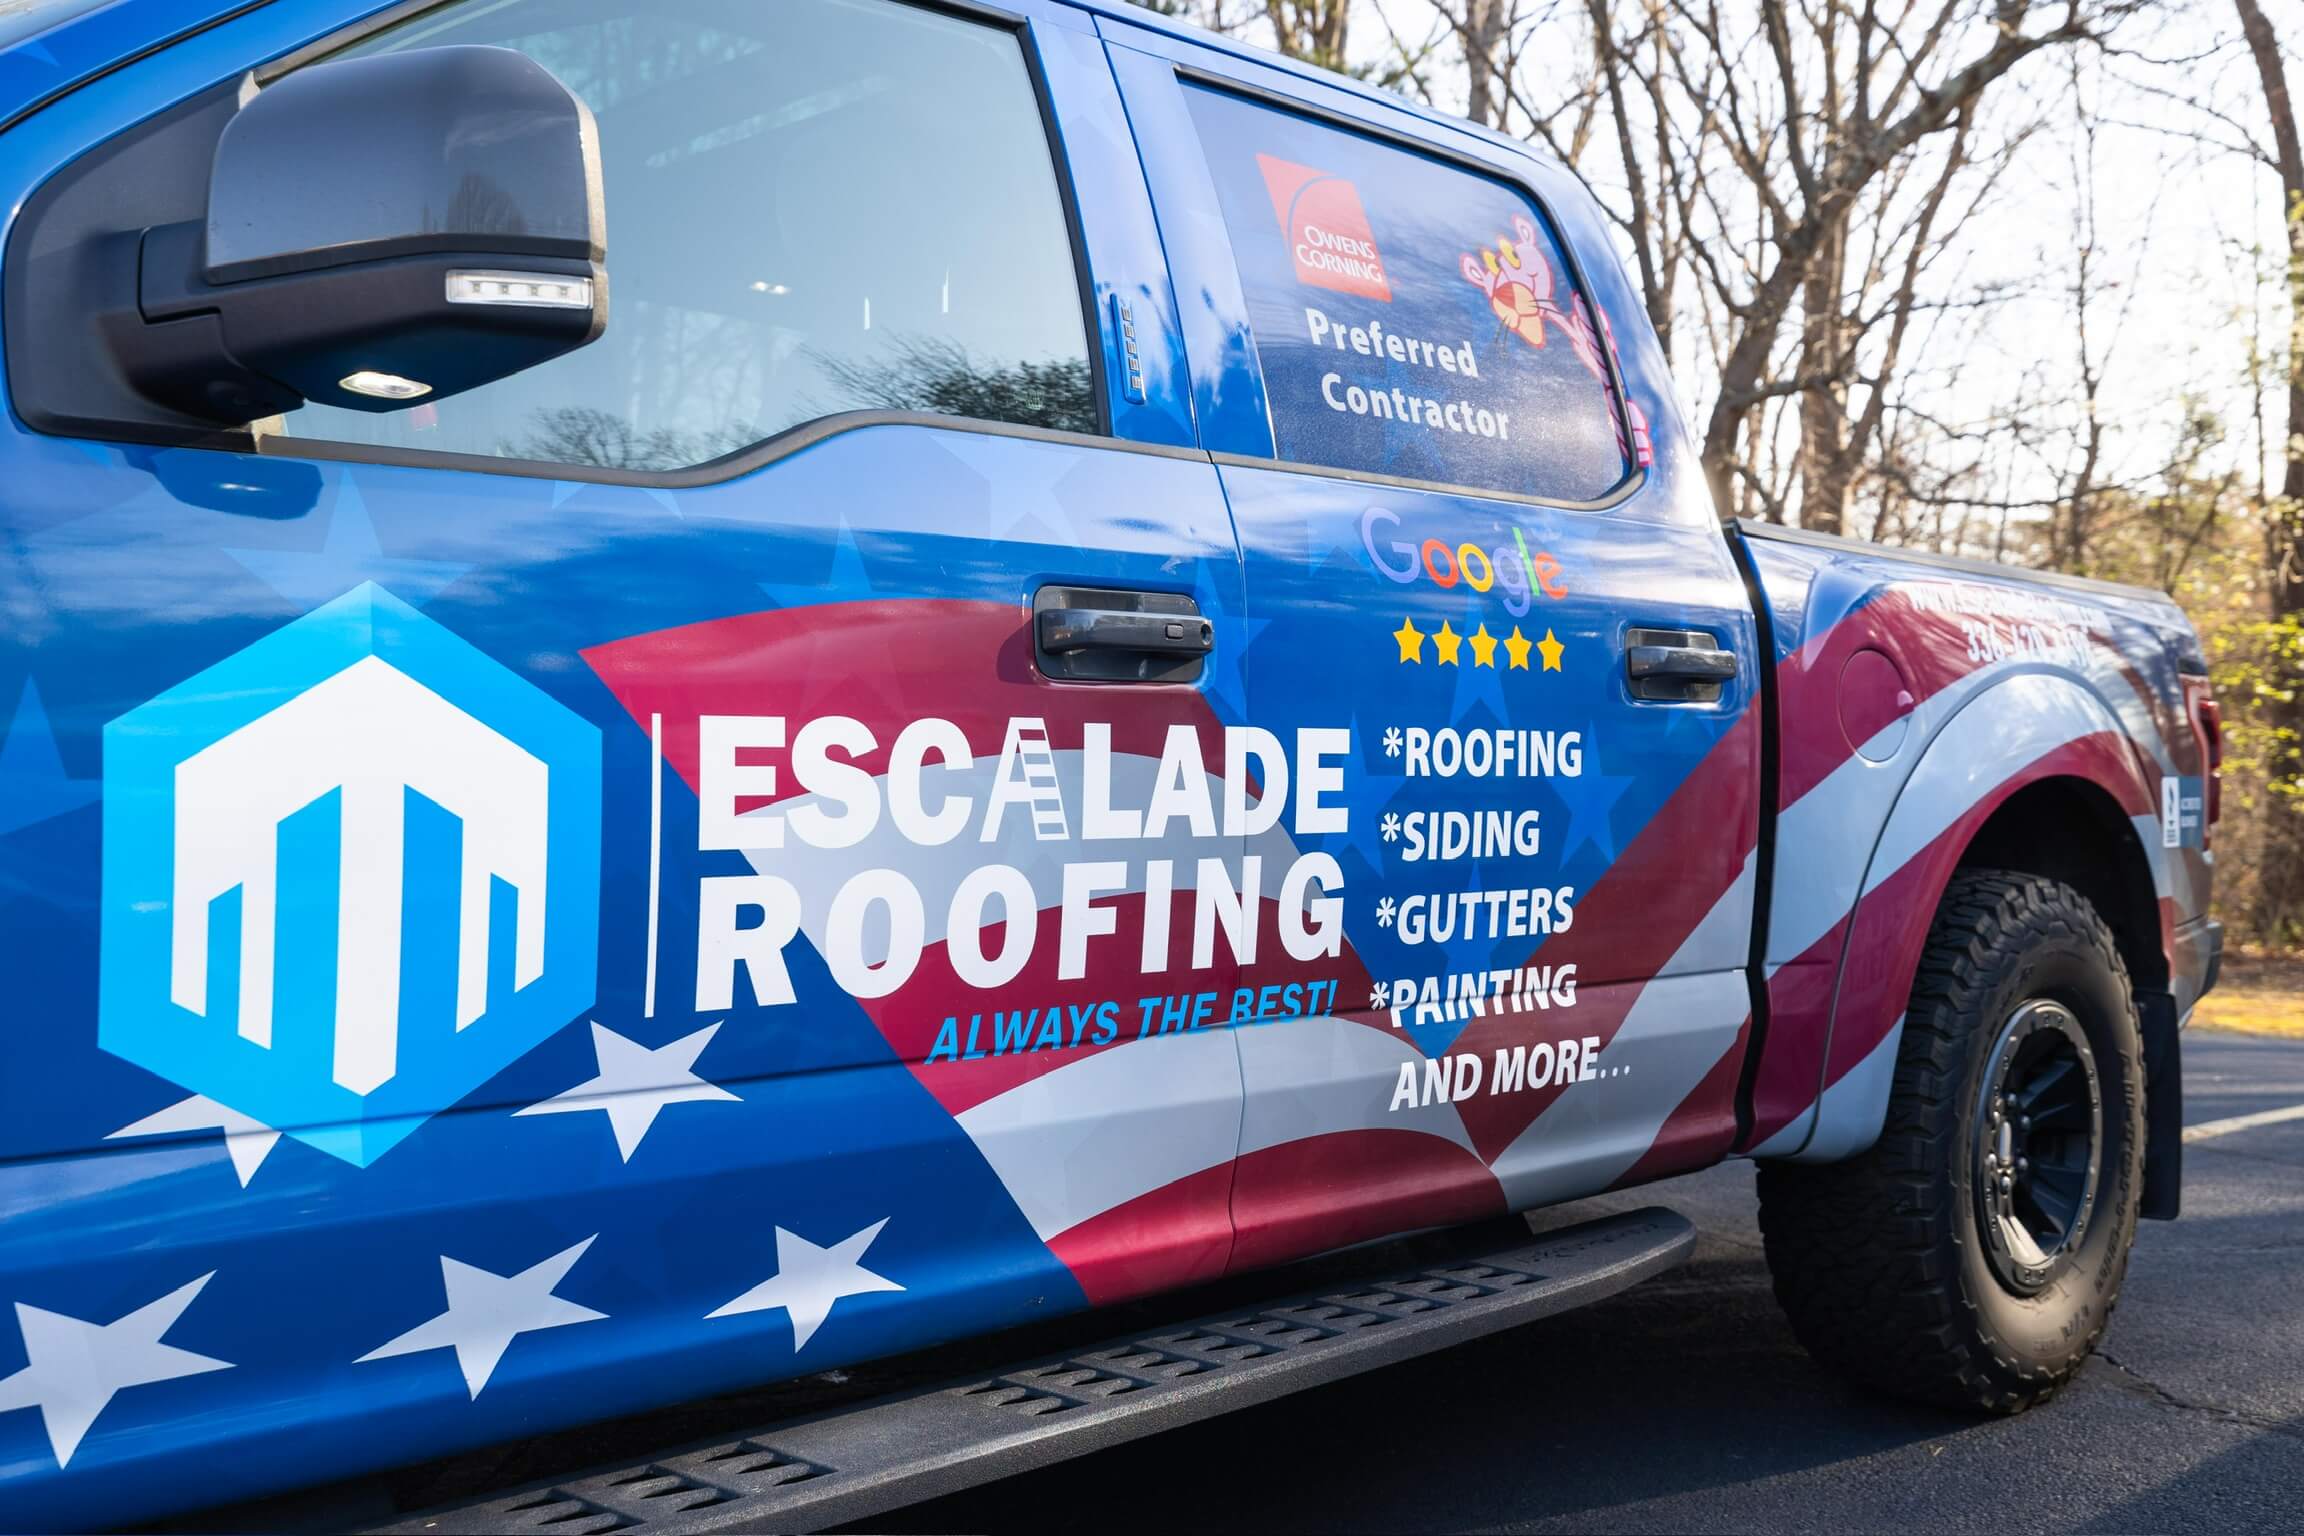 escalade roofing professional roofer logo on truck asheboro nc